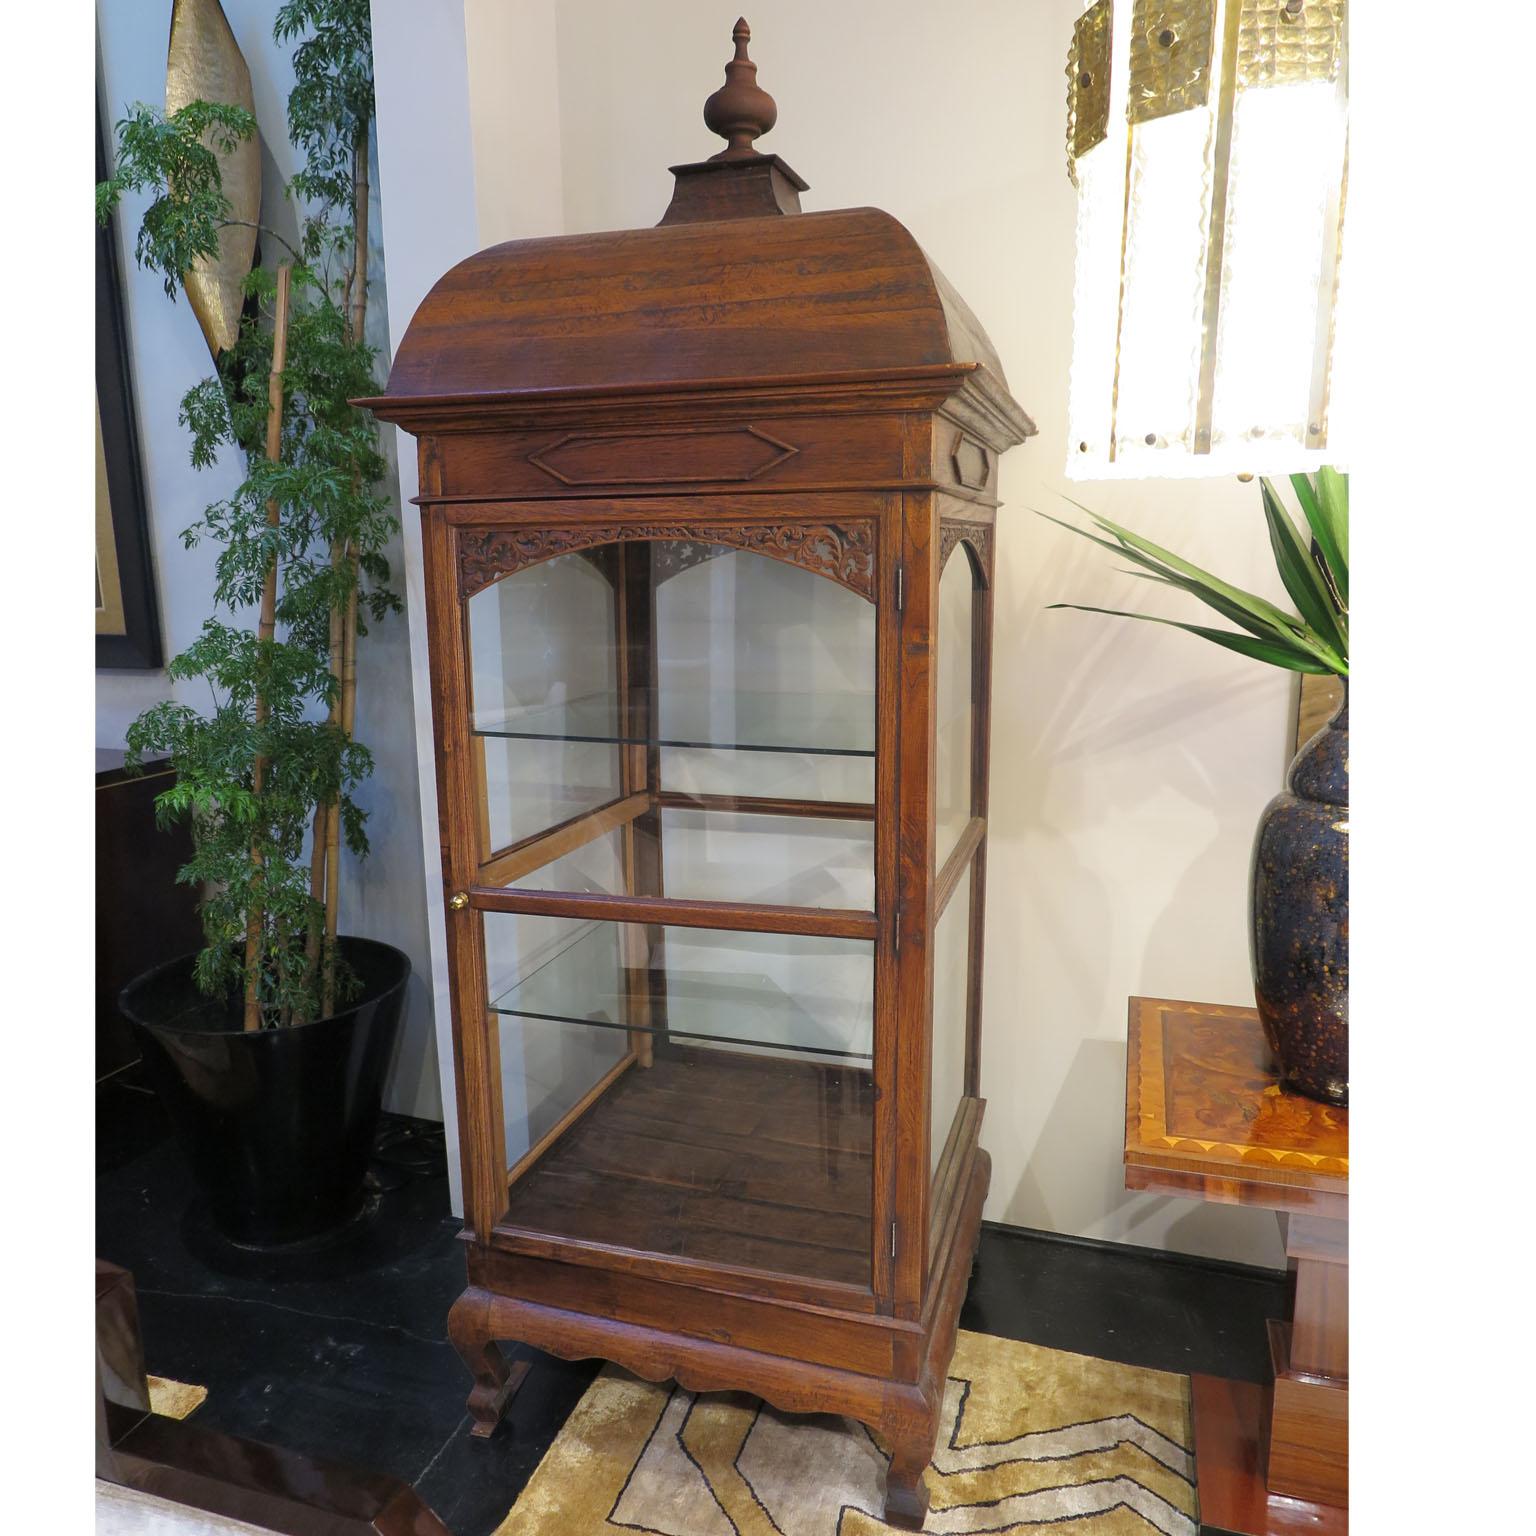 This 20th century wooden vitrine stems from Eastern Europe. The glass panel enclosure features two glass shelves. Above the door sits an ornately carved detail of latticework. The curved roof displays a decorative finial.